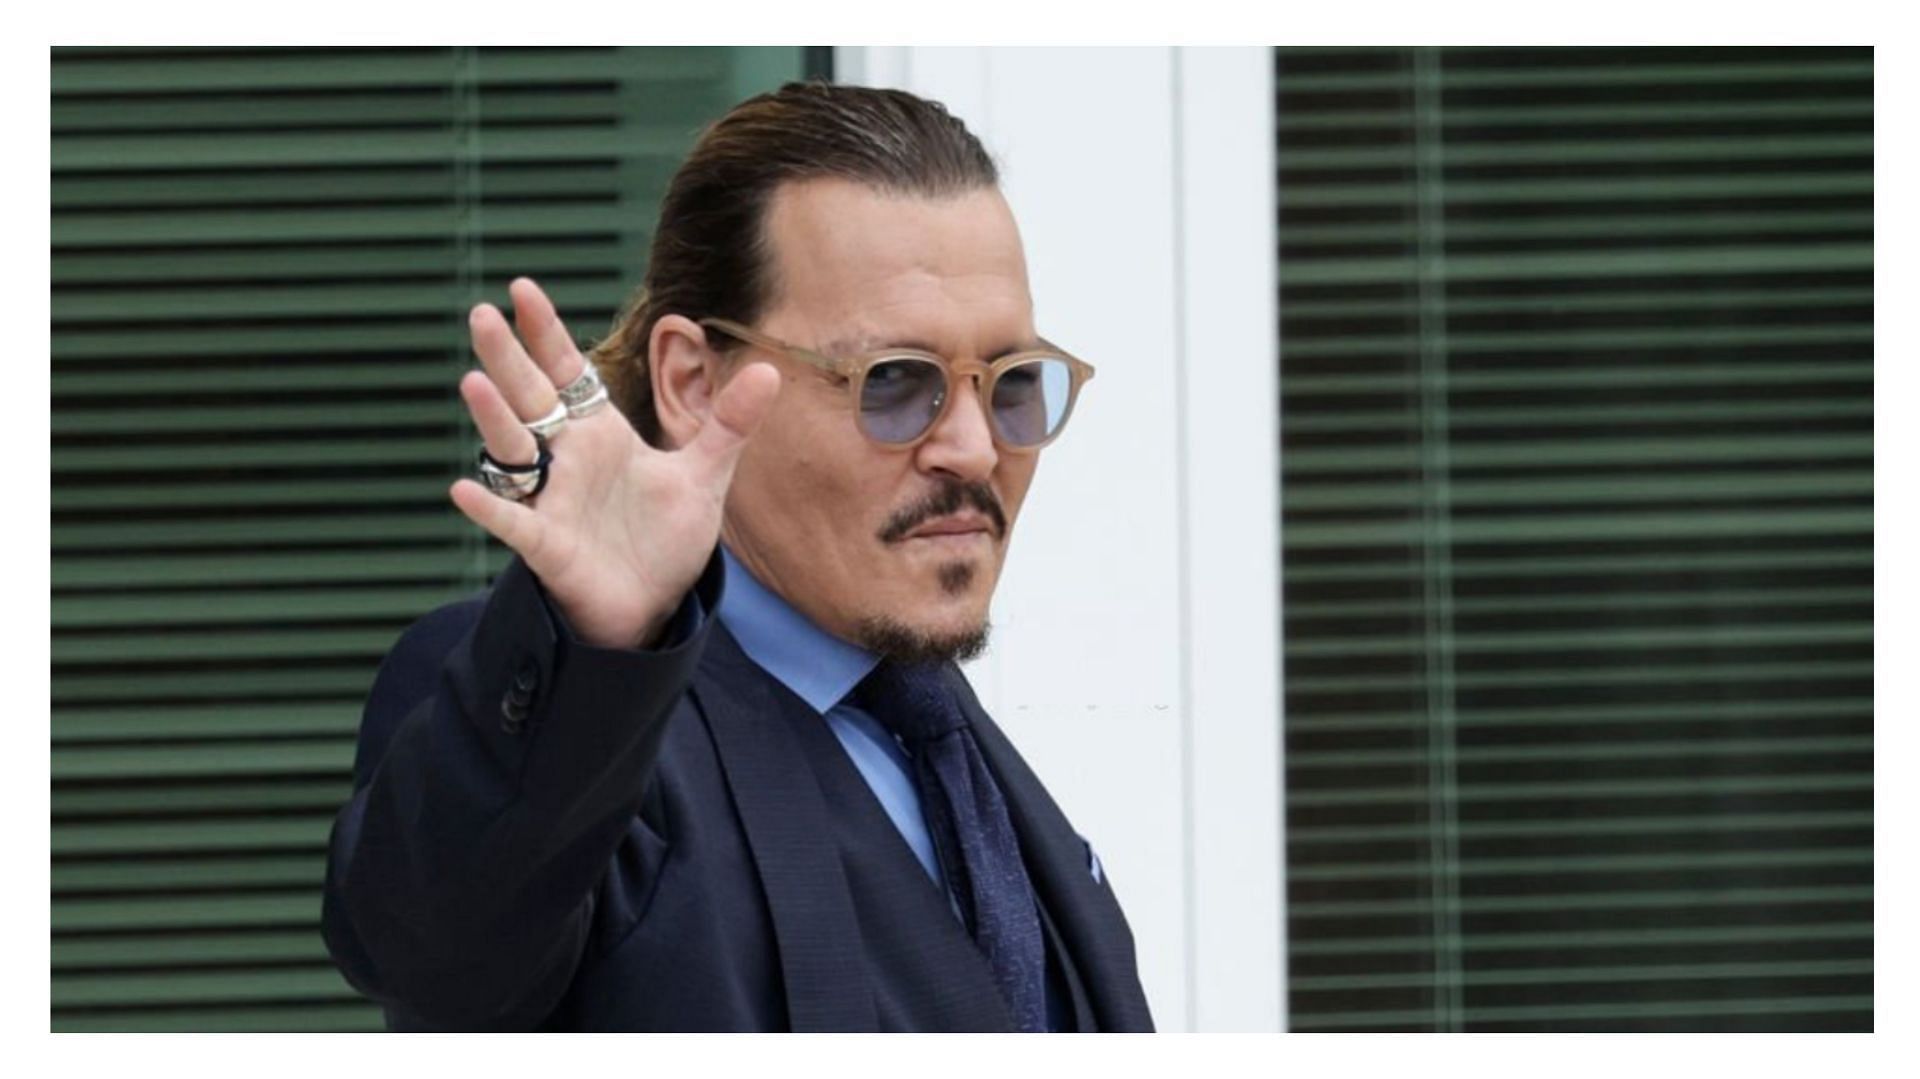 Johnny Depp made his TikTok debut after his victory at the defamation trial (Image via Kevin Dietsch/Getty Images)